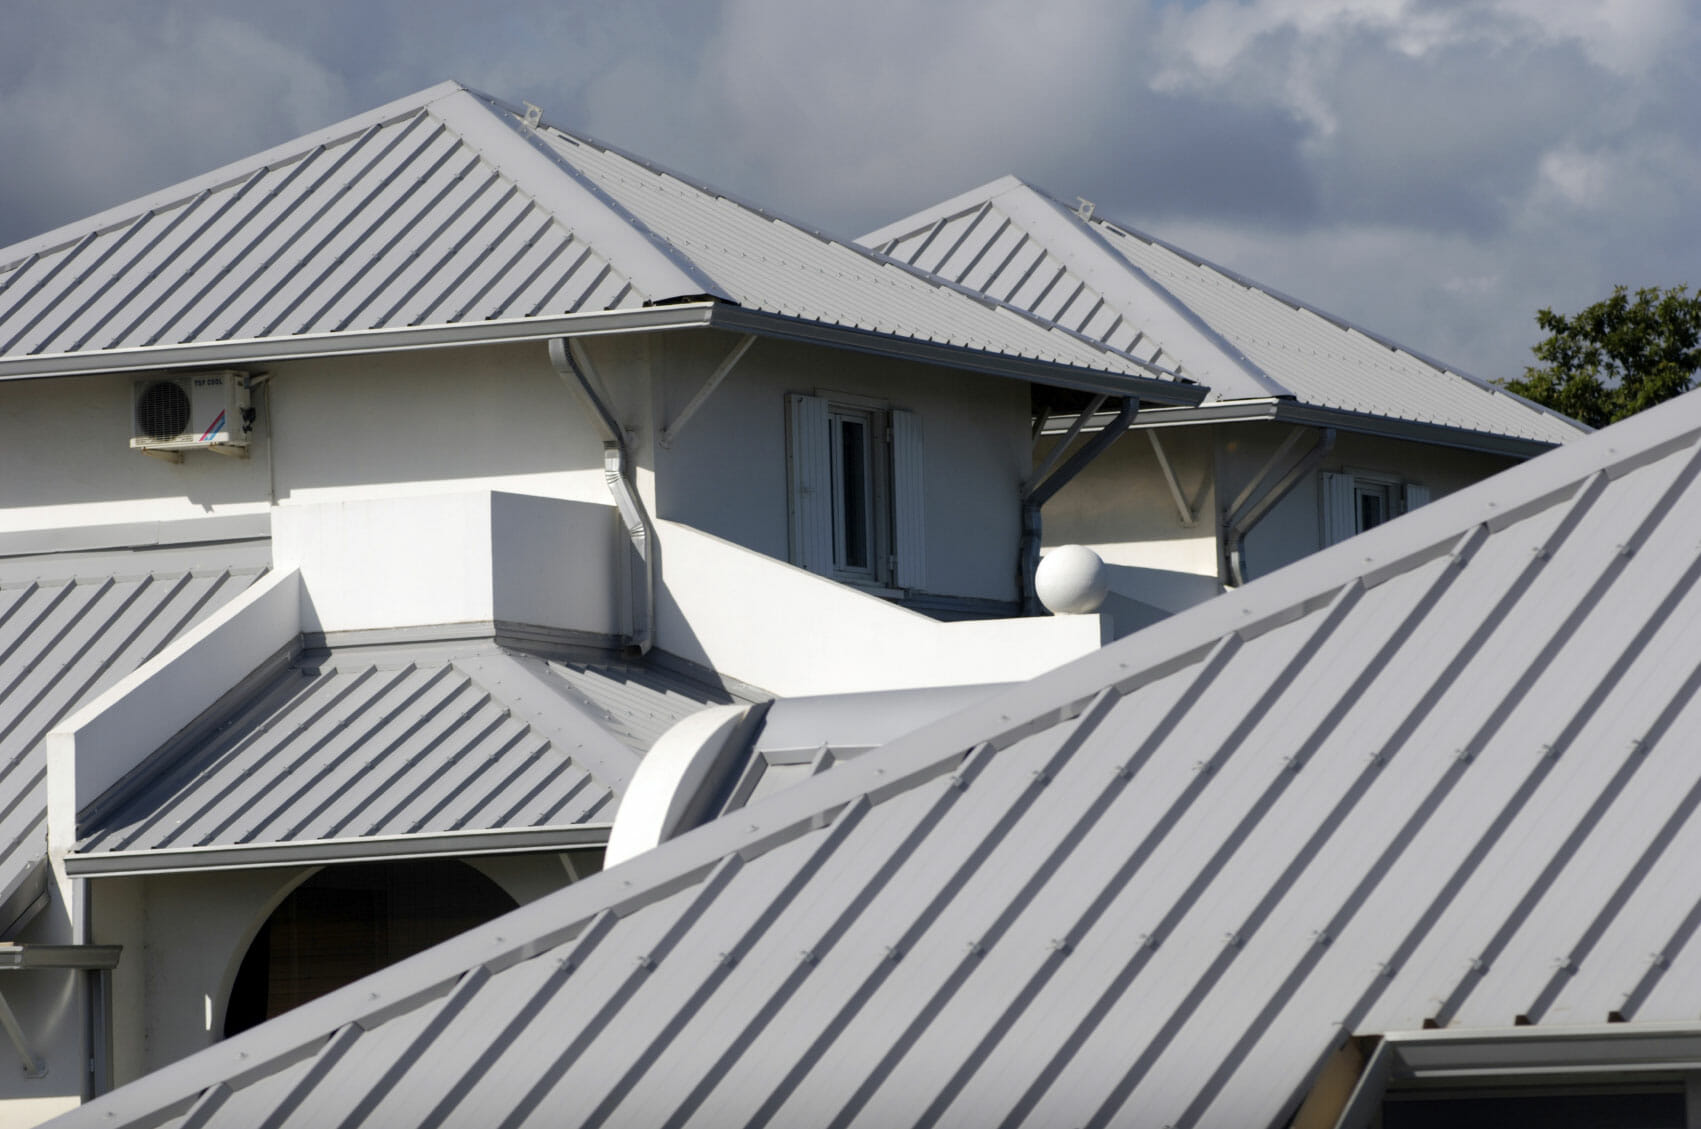 Aluminum roofing installation and repair in Franklin, TN